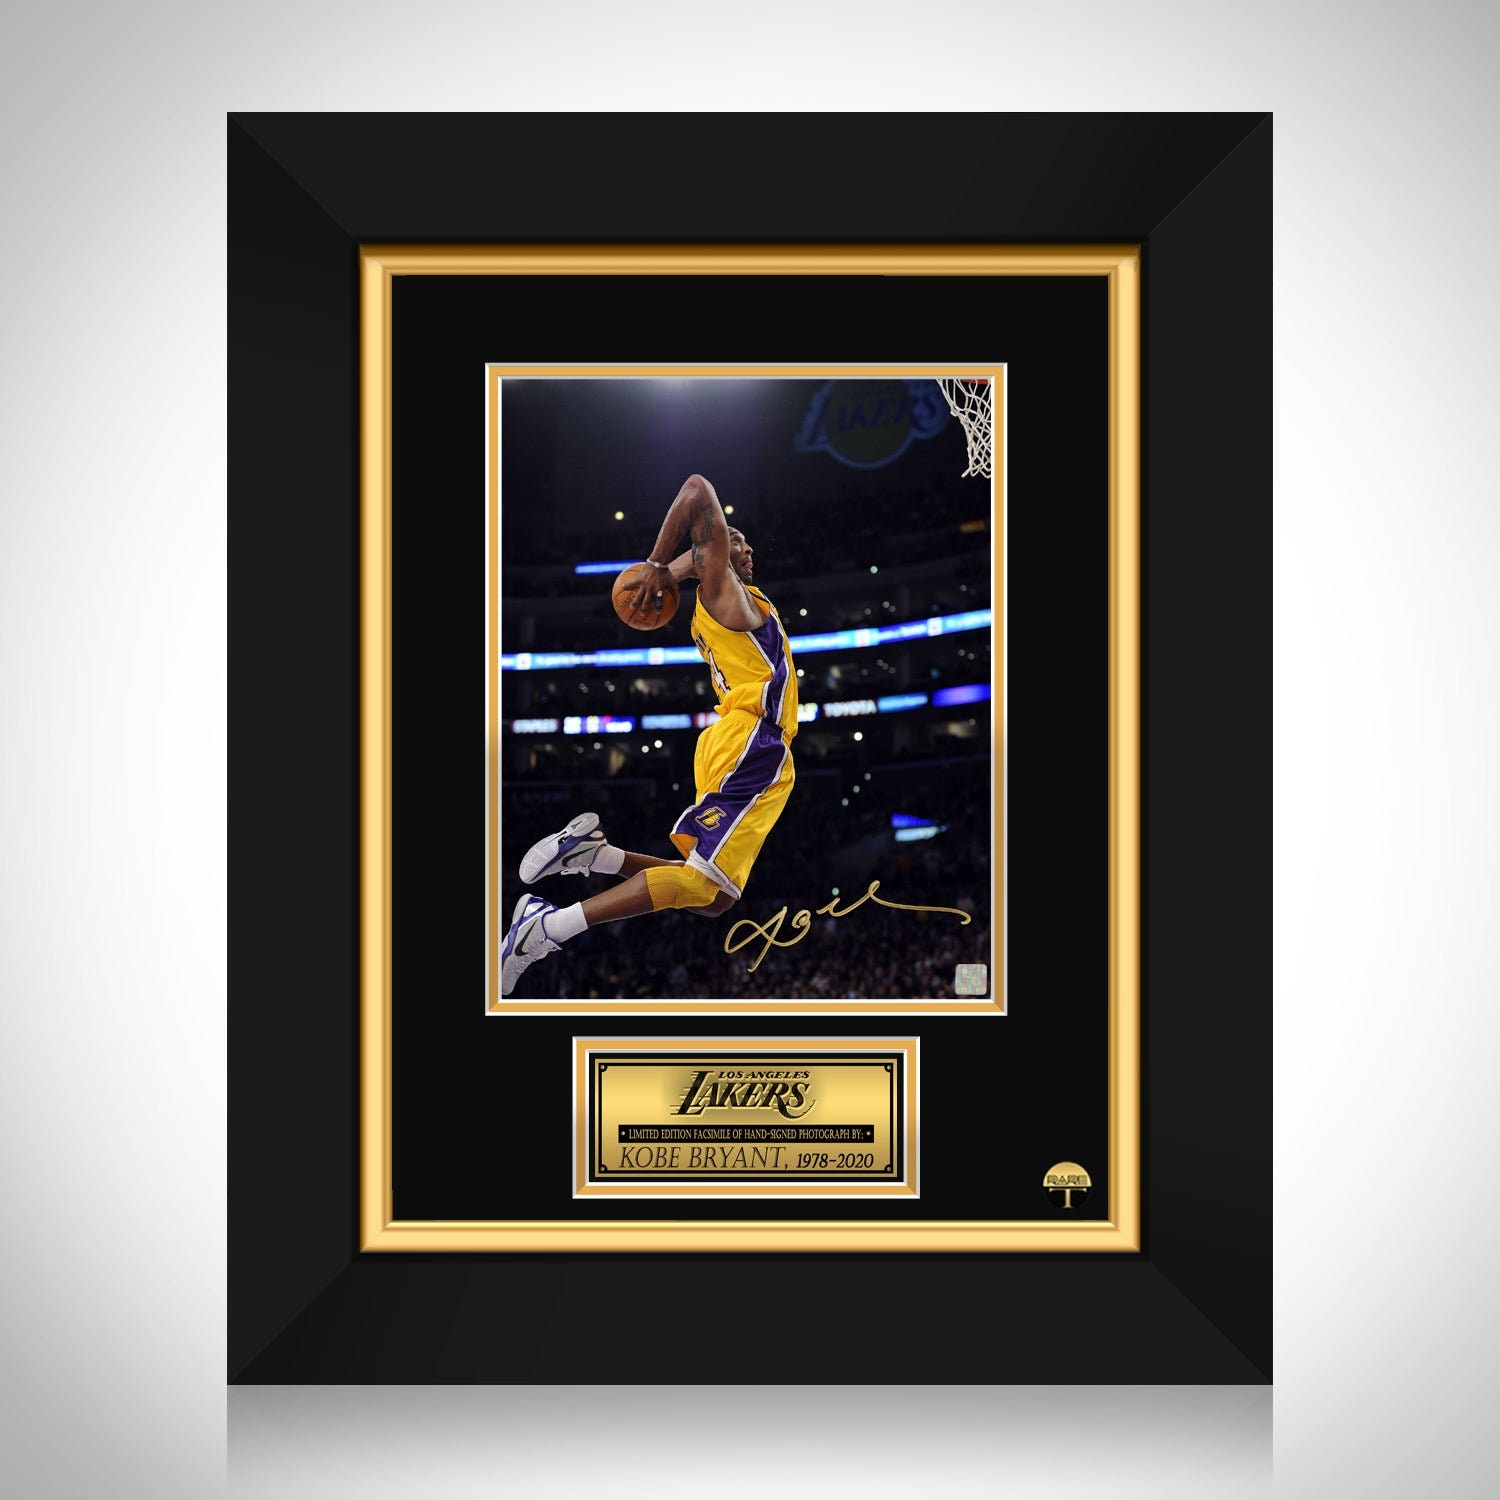 Ron Artest Mamba 4 Ever Autographed Los Angeles Lakers Kobe Bryant